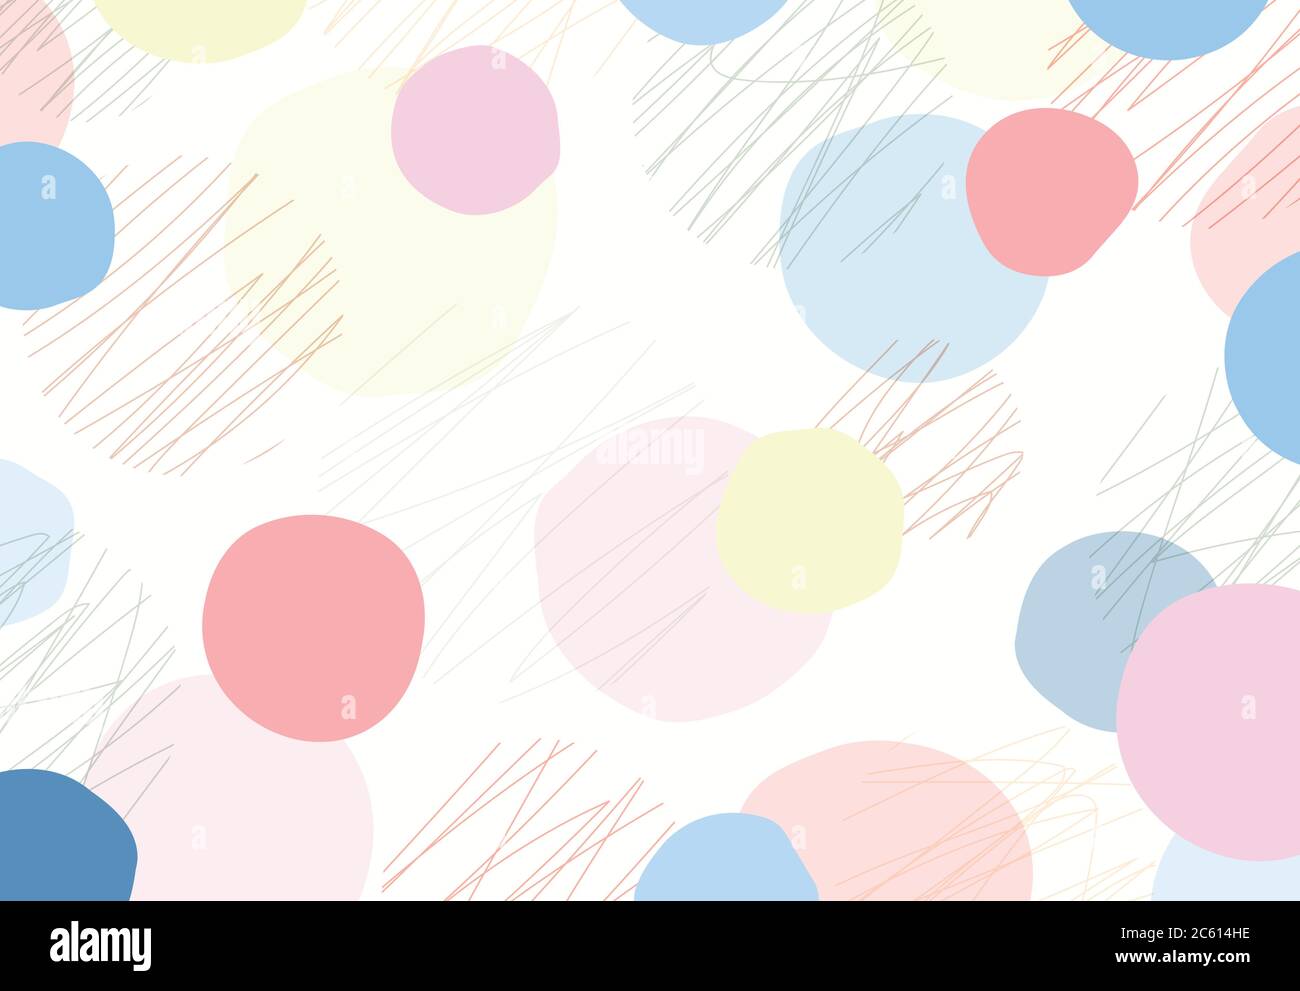 Abstract doodle cute round shape pattern design of pastel color background. Use for ad, poster, artwork, template design, print. illustration vector e Stock Vector